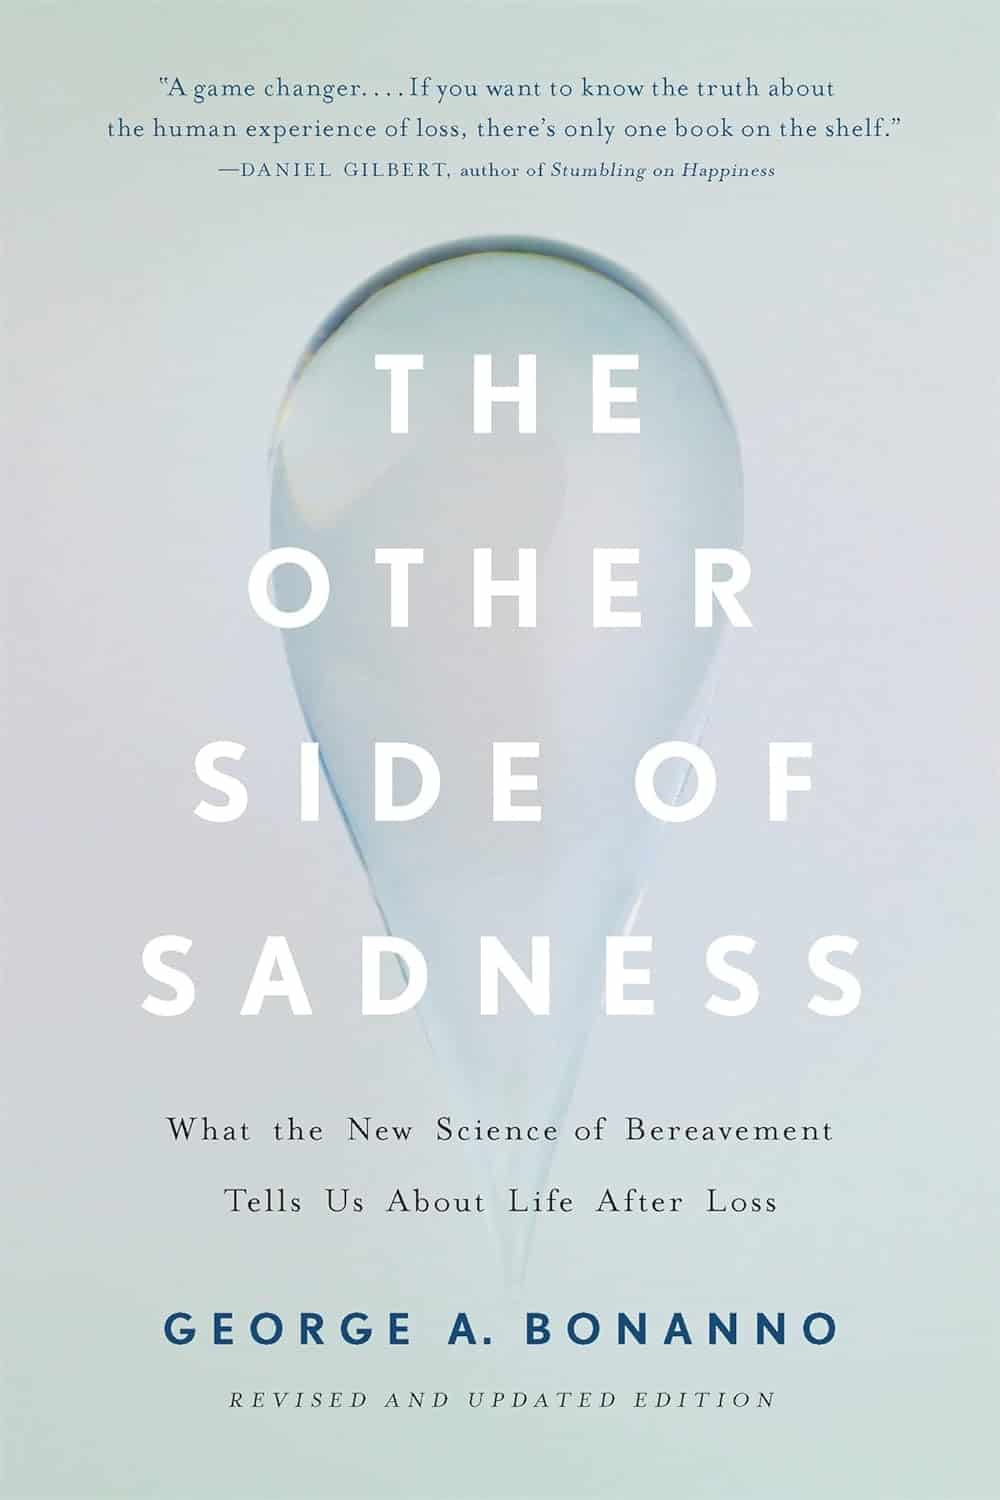 The Other Side of Sadness by George A. Bonanno, PhD